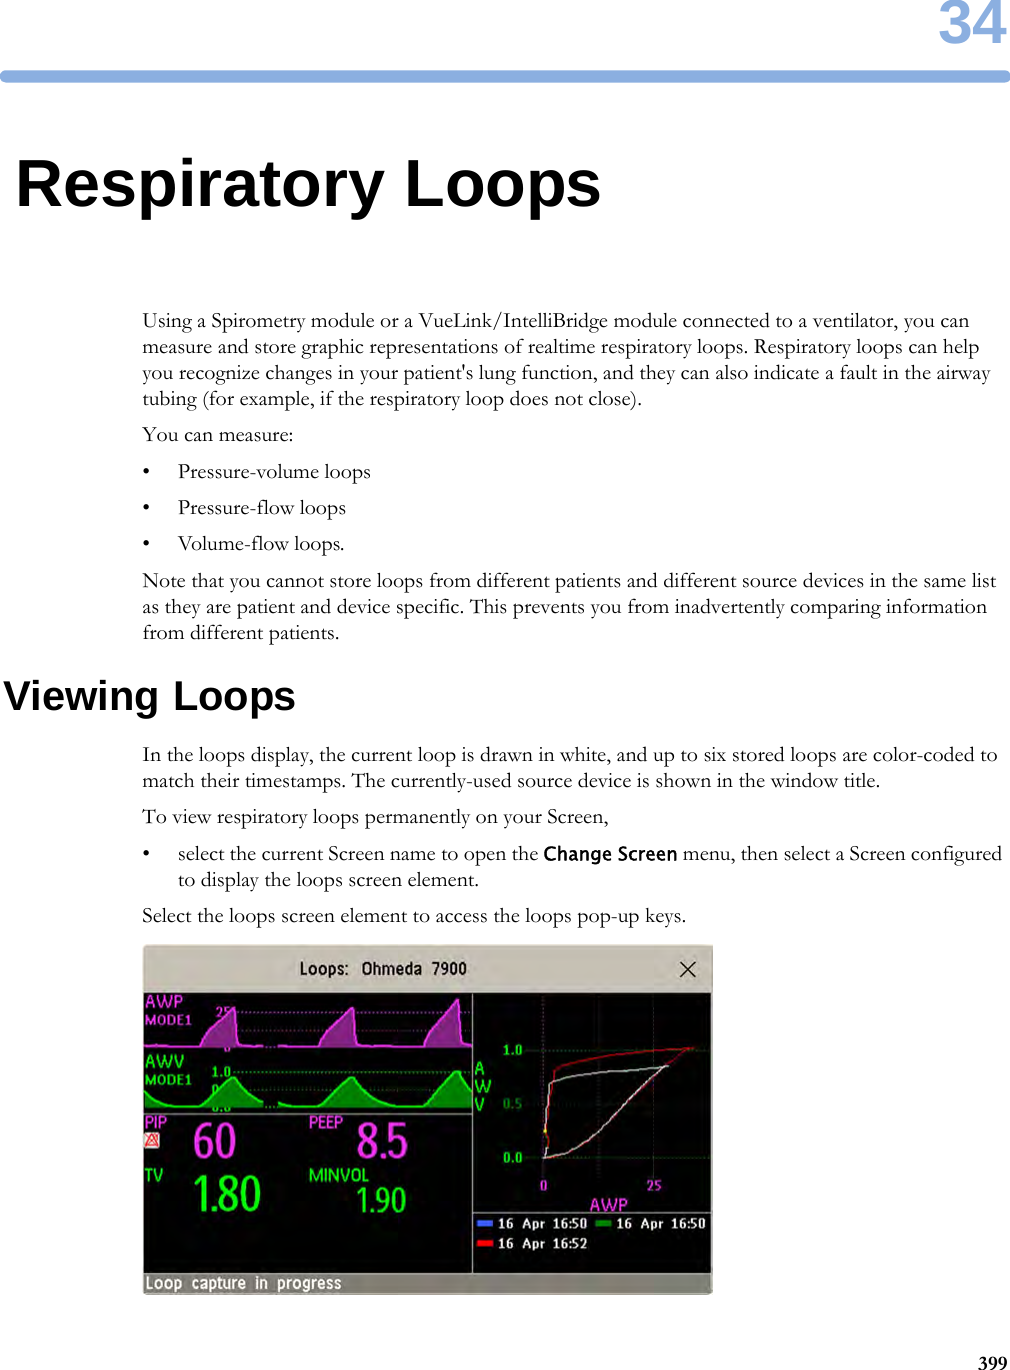 3439934Respiratory LoopsUsing a Spirometry module or a VueLink/IntelliBridge module connected to a ventilator, you can measure and store graphic representations of realtime respiratory loops. Respiratory loops can help you recognize changes in your patient&apos;s lung function, and they can also indicate a fault in the airway tubing (for example, if the respiratory loop does not close).You can measure:• Pressure-volume loops• Pressure-flow loops•Volume-flow loops.Note that you cannot store loops from different patients and different source devices in the same list as they are patient and device specific. This prevents you from inadvertently comparing information from different patients.Viewing LoopsIn the loops display, the current loop is drawn in white, and up to six stored loops are color-coded to match their timestamps. The currently-used source device is shown in the window title.To view respiratory loops permanently on your Screen,• select the current Screen name to open the Change Screen menu, then select a Screen configured to display the loops screen element.Select the loops screen element to access the loops pop-up keys.